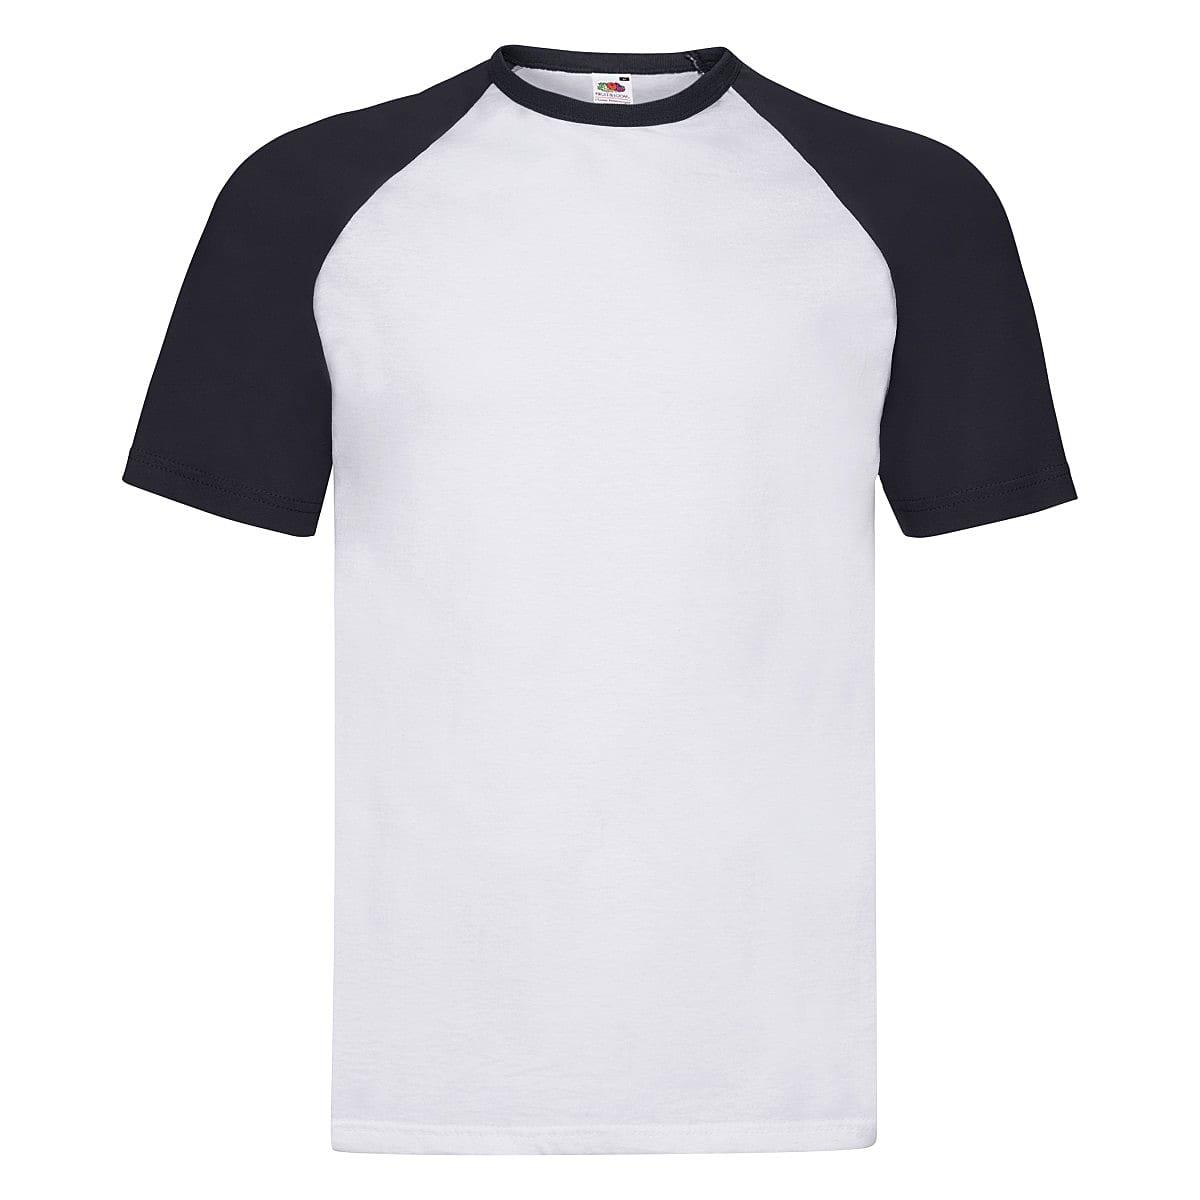 Fruit Of The Loom Short-Sleeve Baseball T-Shirt in White / Deep Navy (Product Code: 61026)